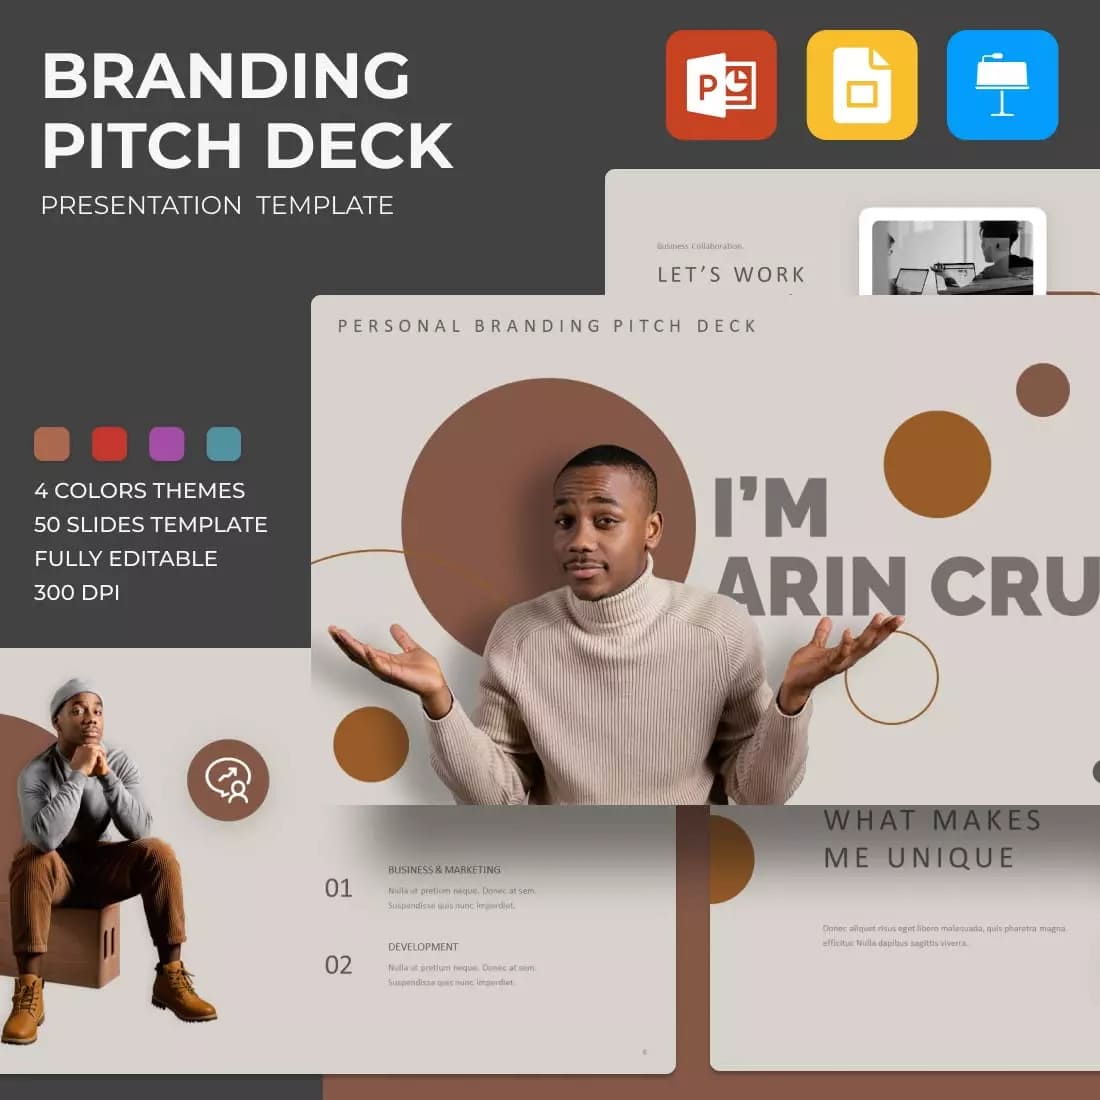 Branding Pitch Deck Presentation Template Preview image.